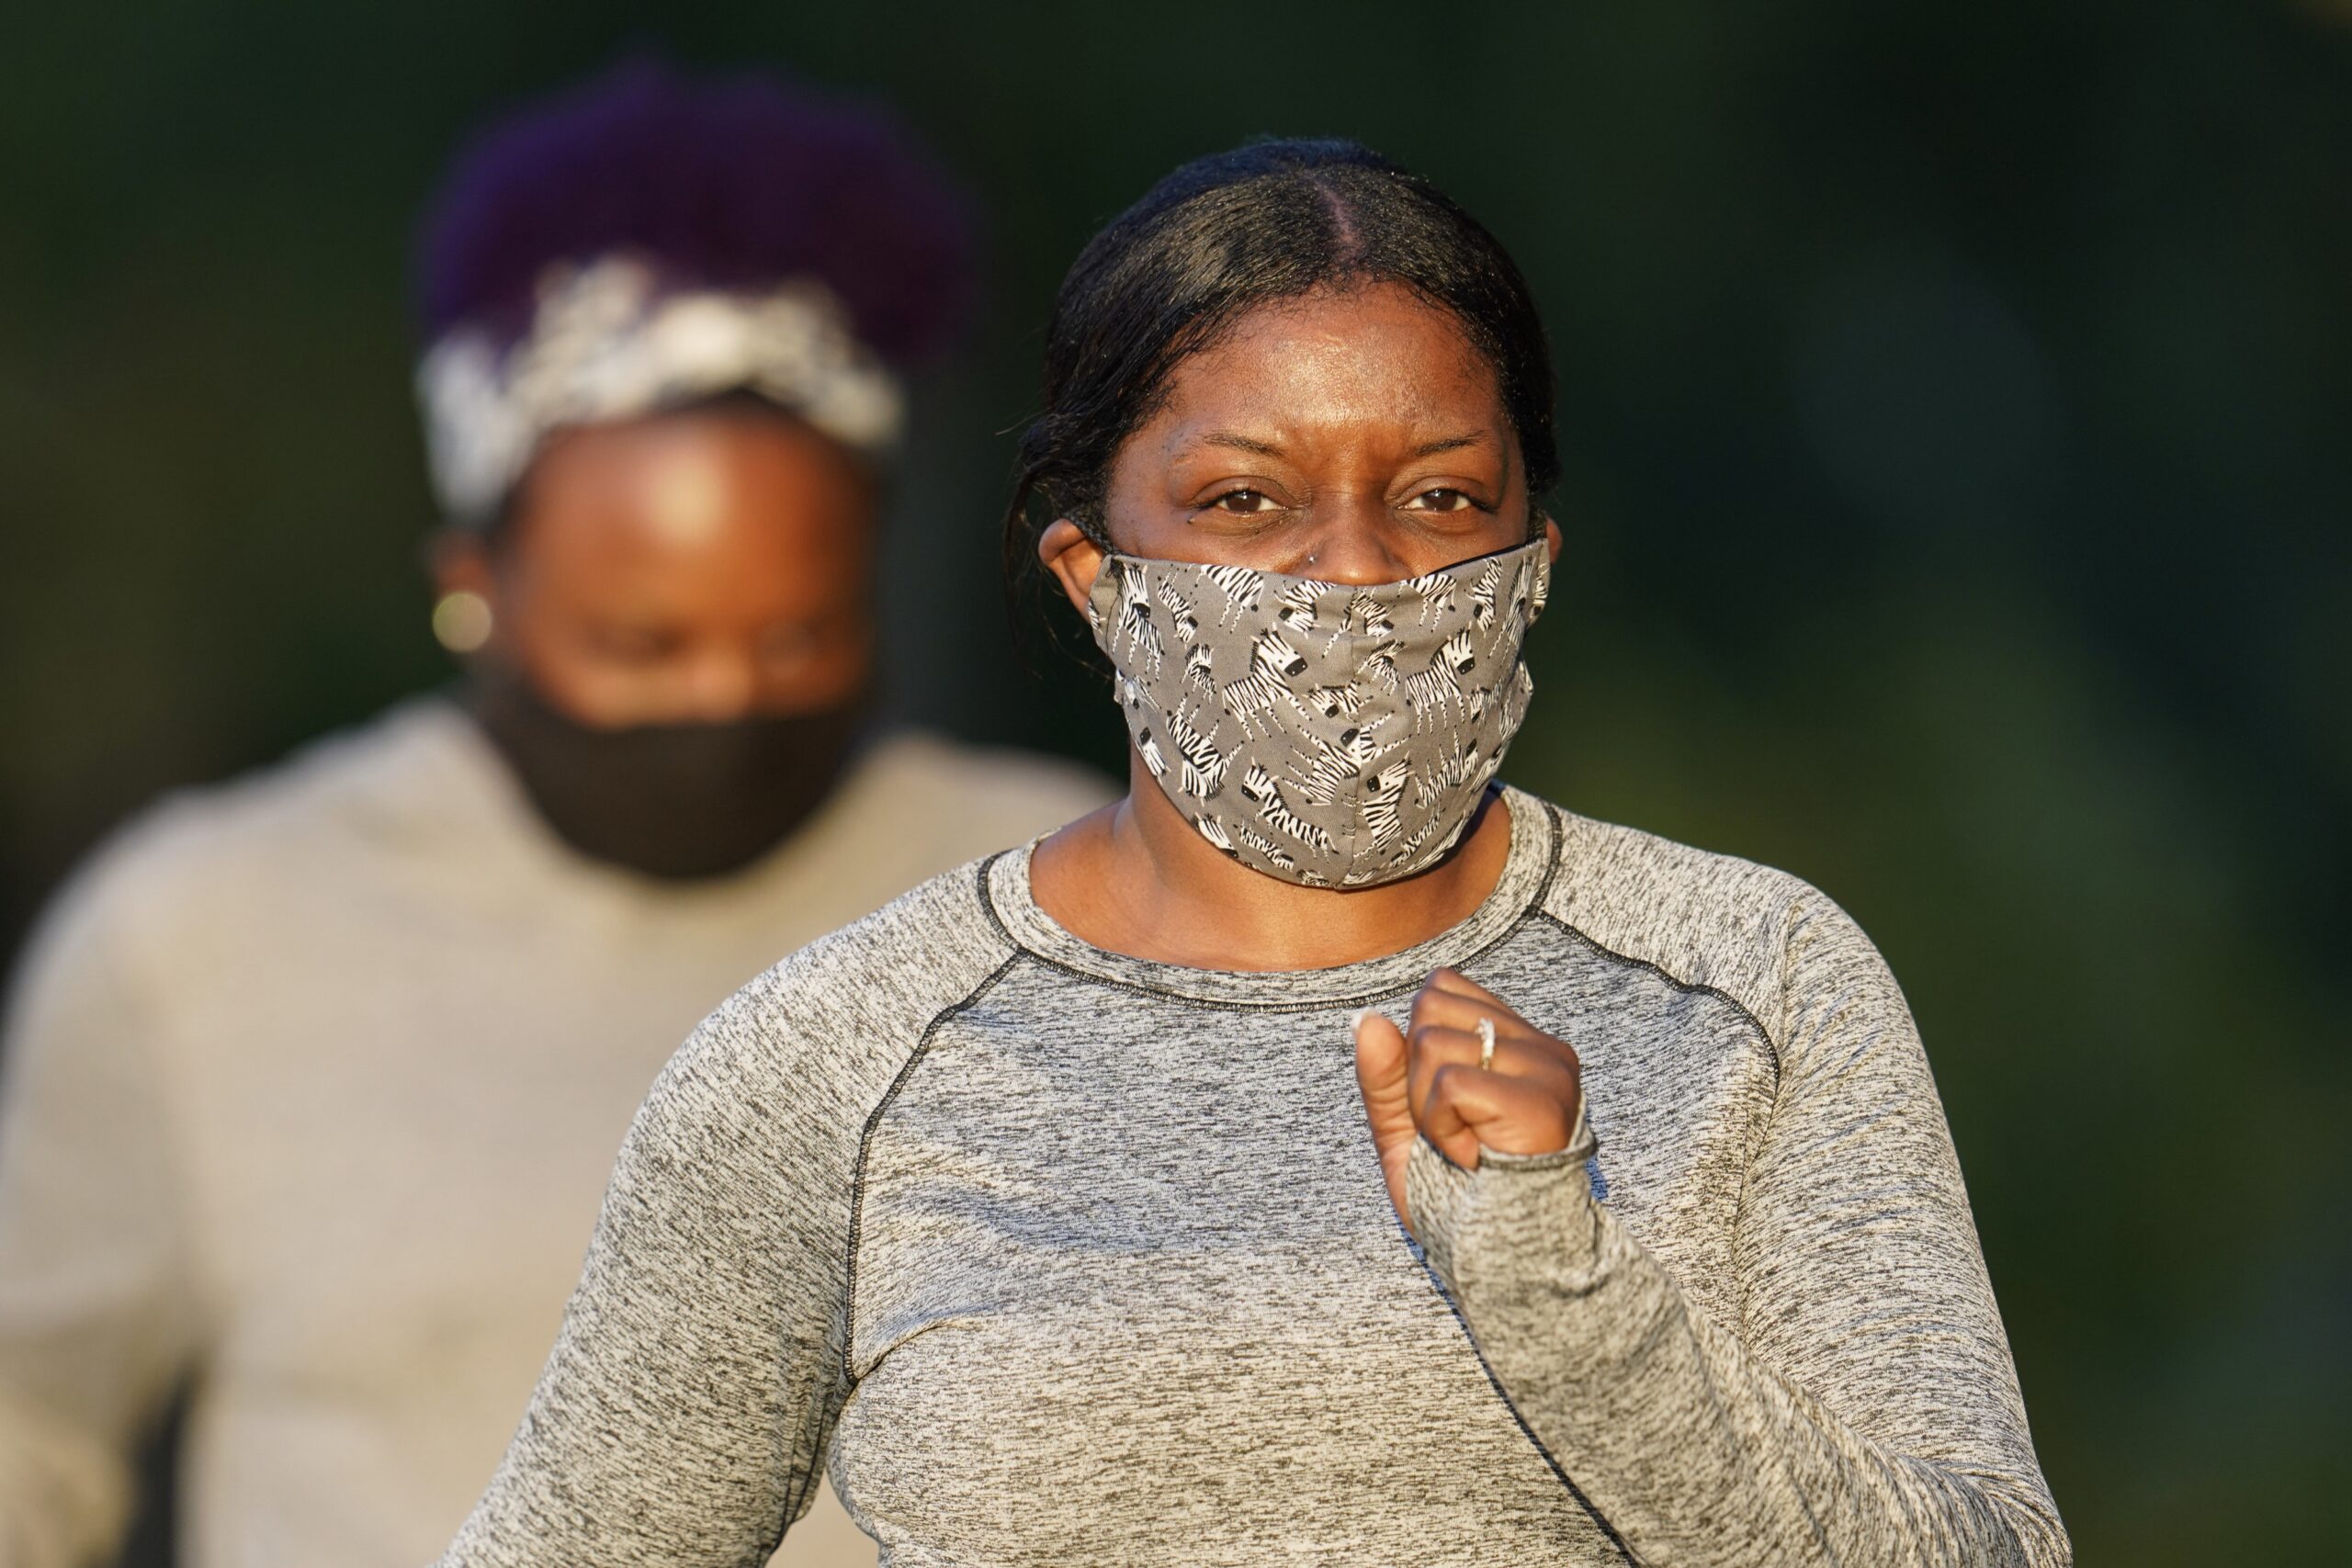 Kedria Grigsby walks along a park trail while wearing a face mask to help prevent the spread of COVID-19